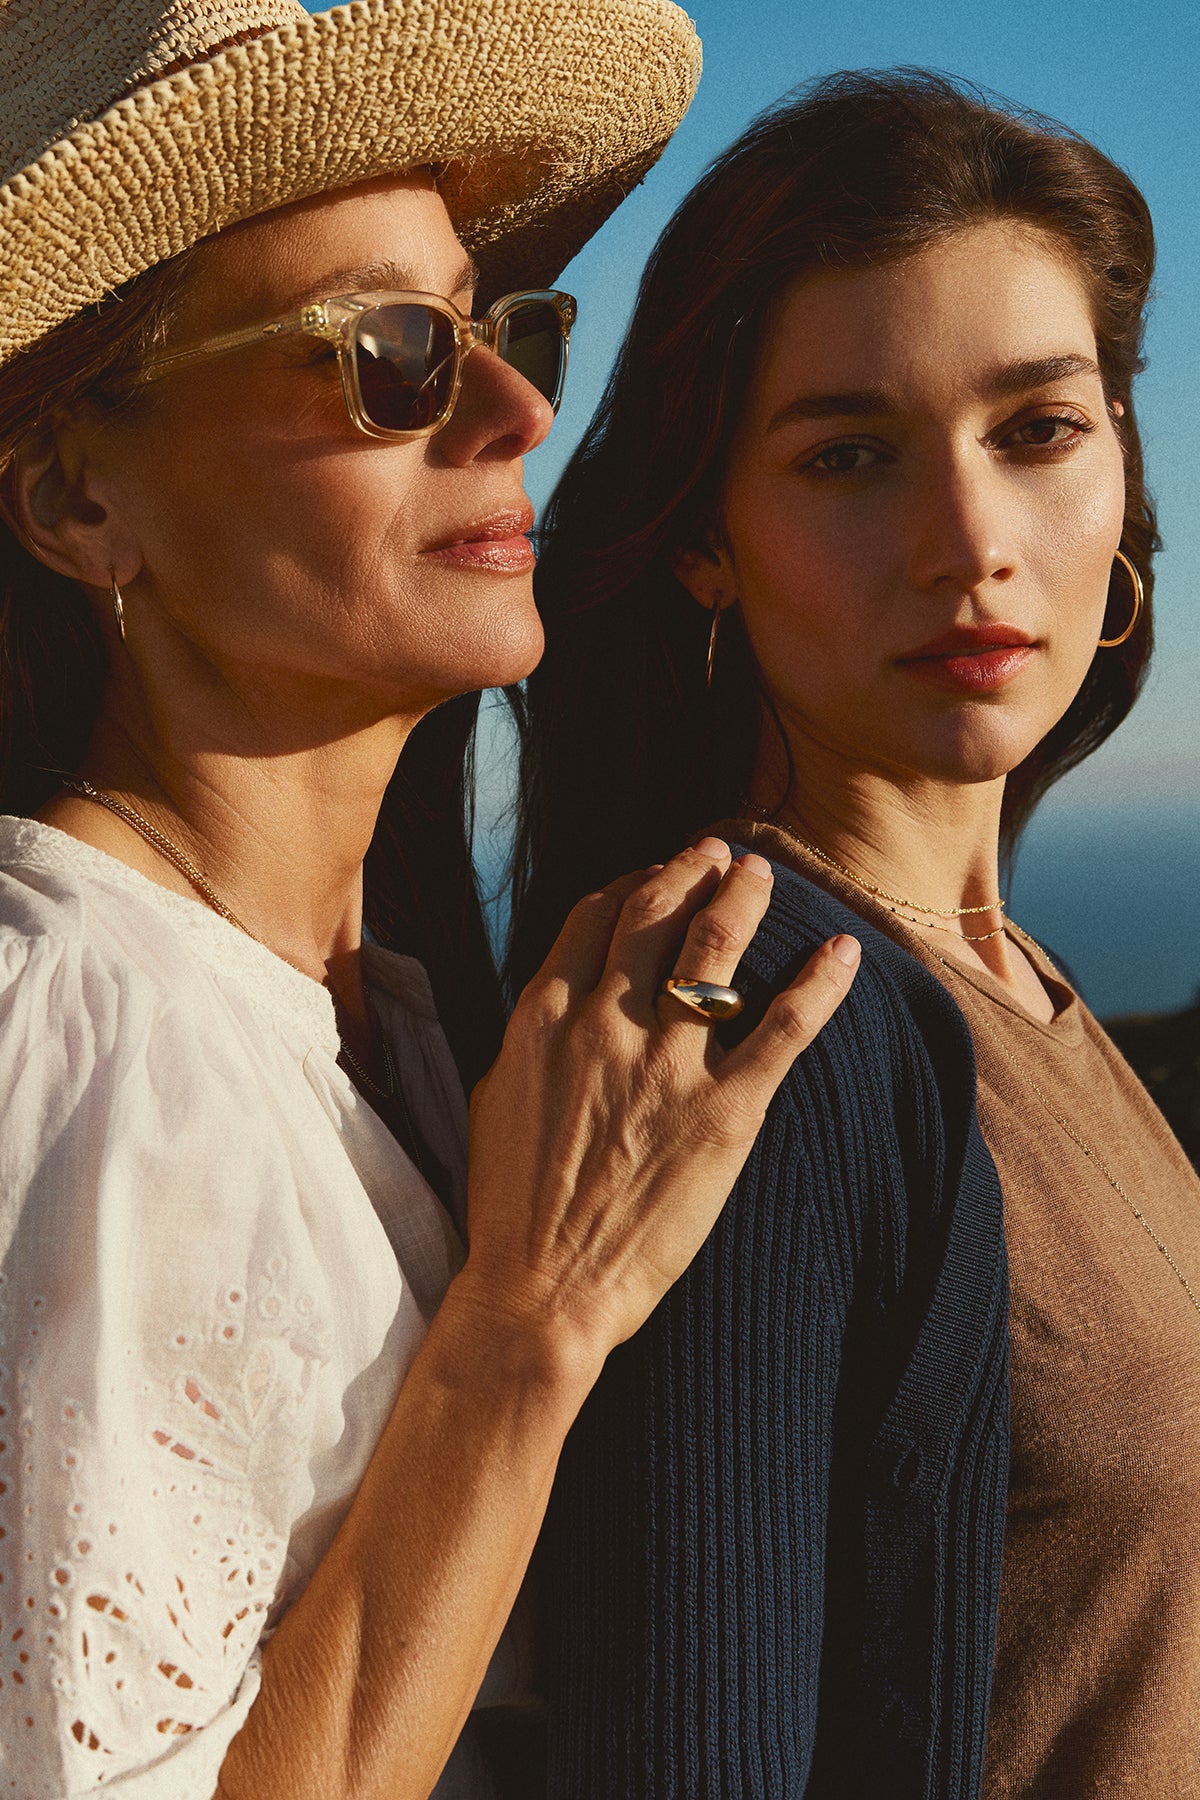   Two women standing close together, one wearing a straw hat and sunglasses, the other in a HYDIE BUTTON FRONT CARDIGAN from Velvet by Graham & Spencer, both looking towards the camera. 